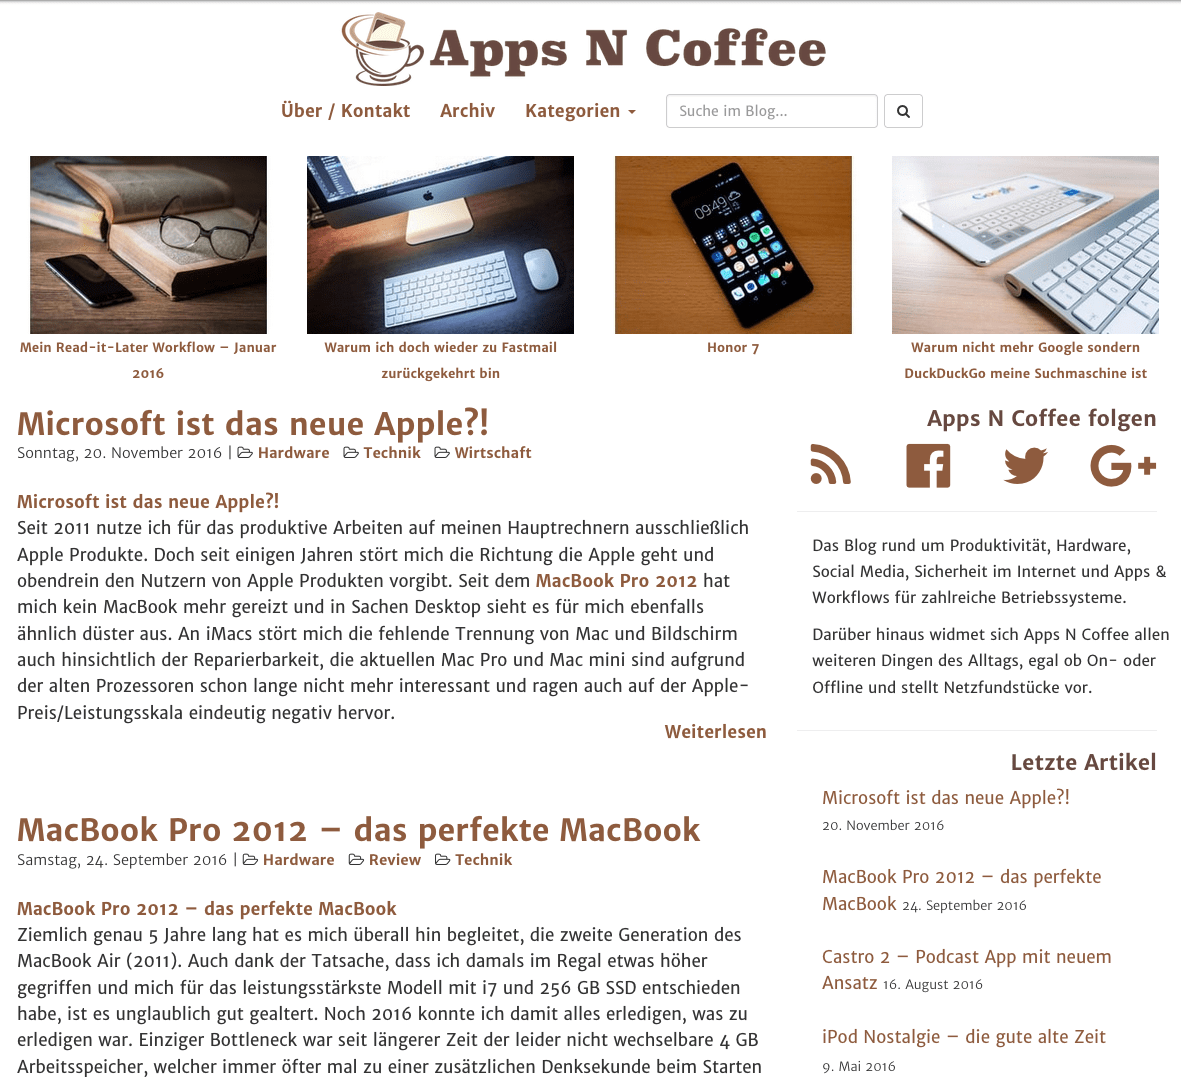 Screenshot of Apps N Coffee (missing the article images) – late 2016